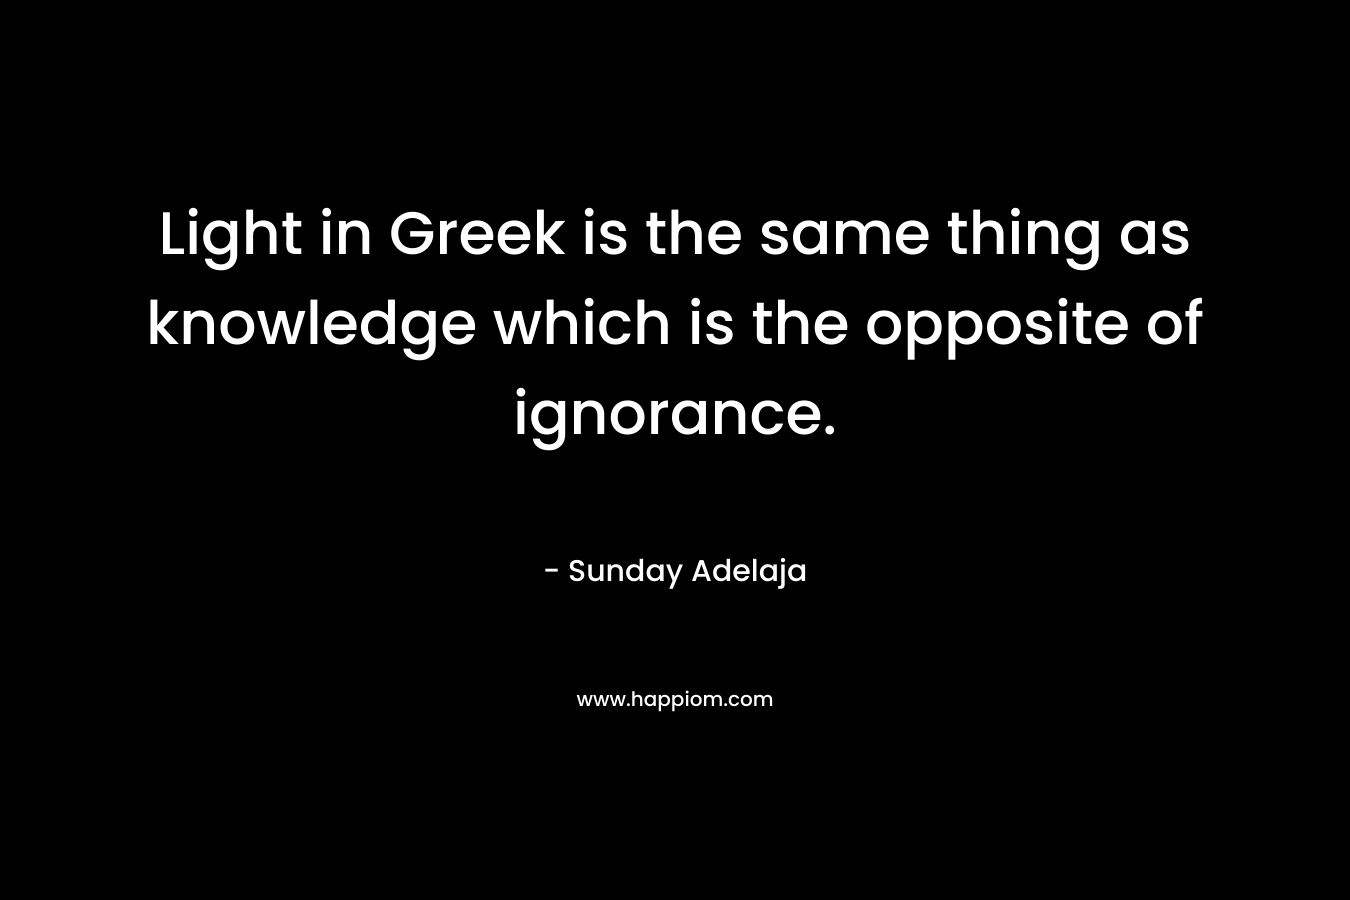 Light in Greek is the same thing as knowledge which is the opposite of ignorance.